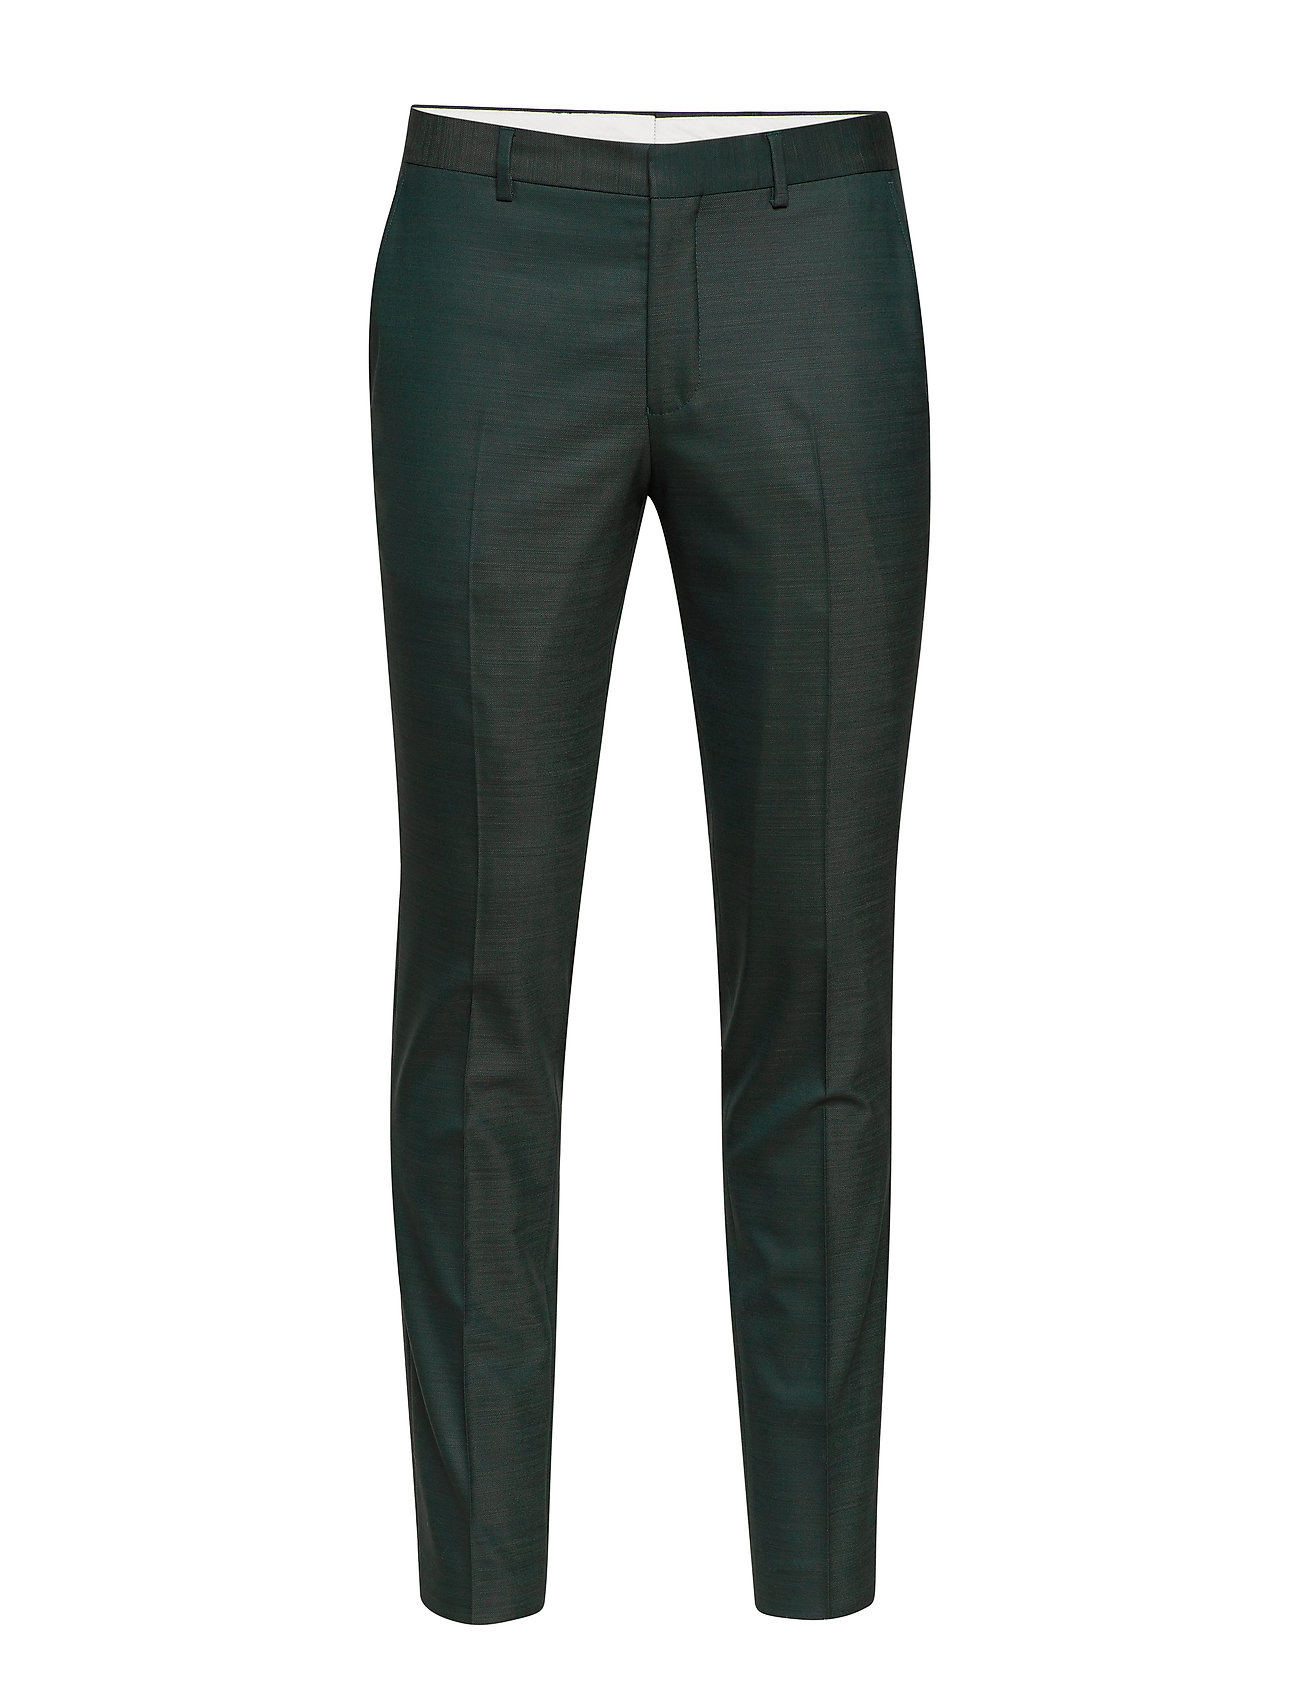 SELECTED HOMME Slhslim-myloiver Green TRS B Noos Pantaloni Completo Uomo 